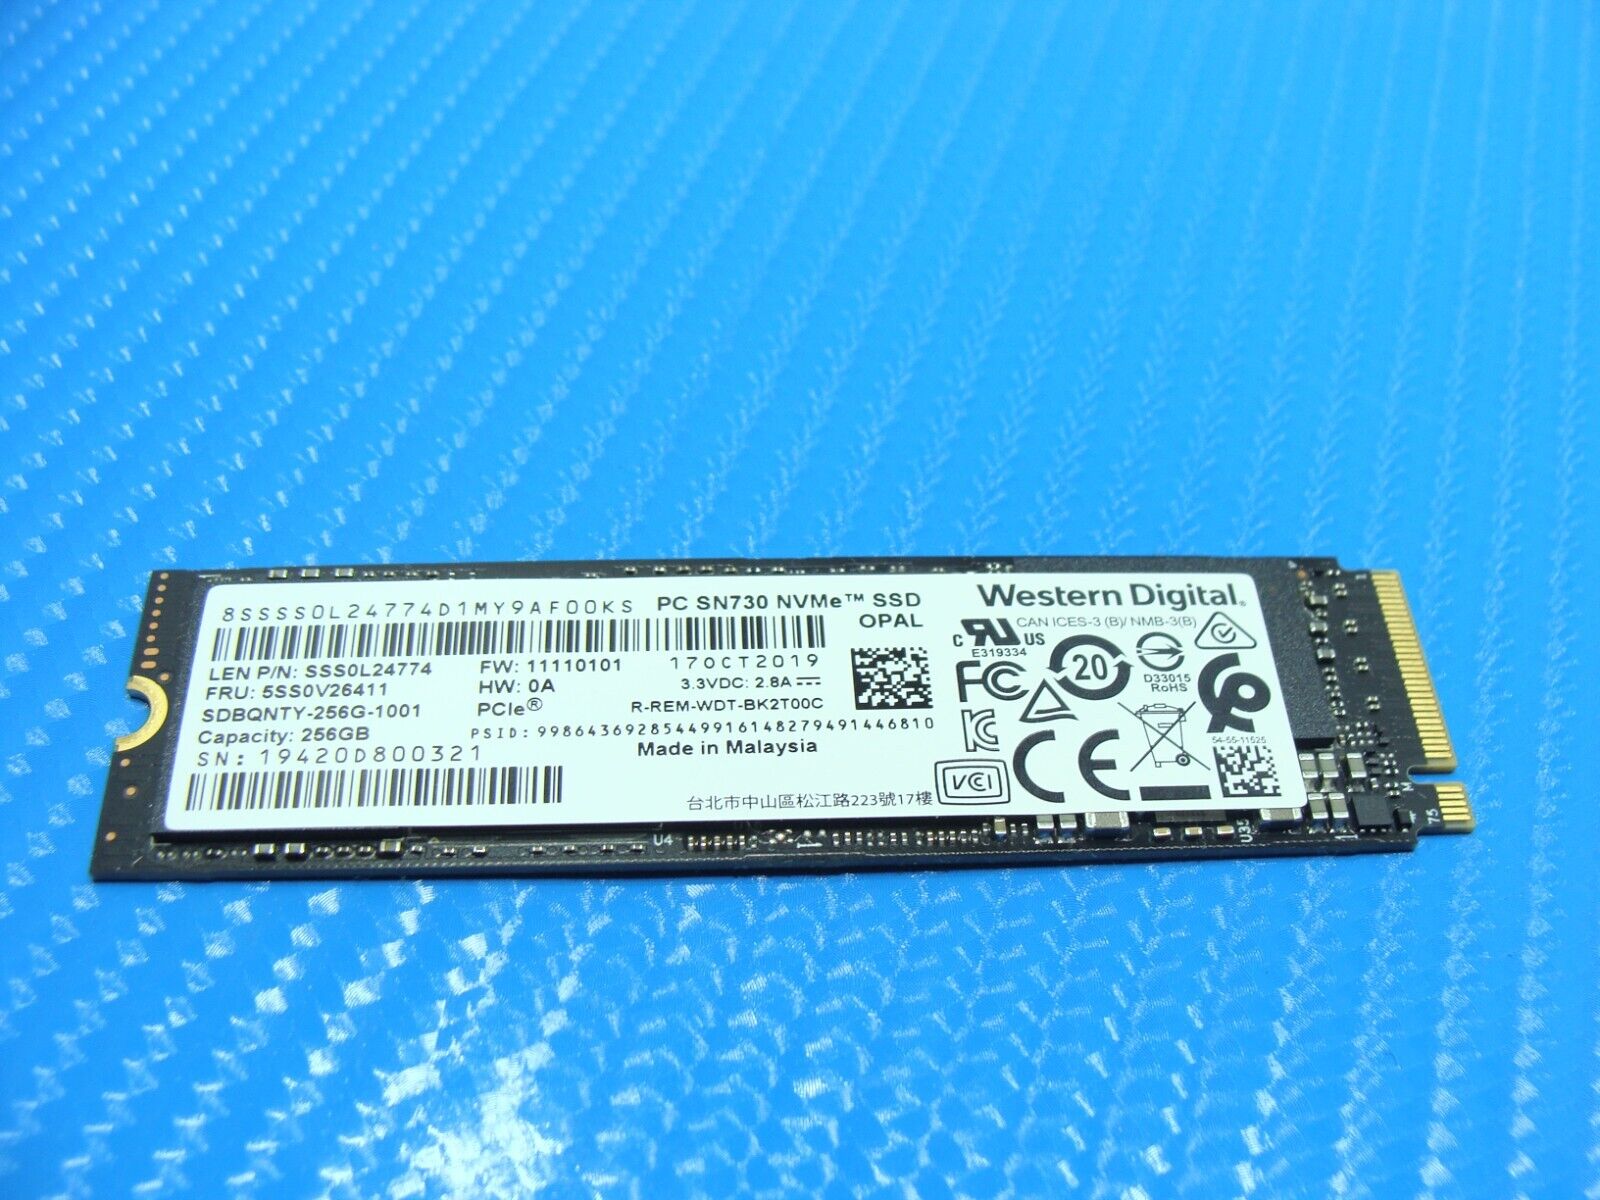 Lenovo T490s WD 256GB NVMe M.2 SSD Solid State Drive SDBQNTY-256G-1001